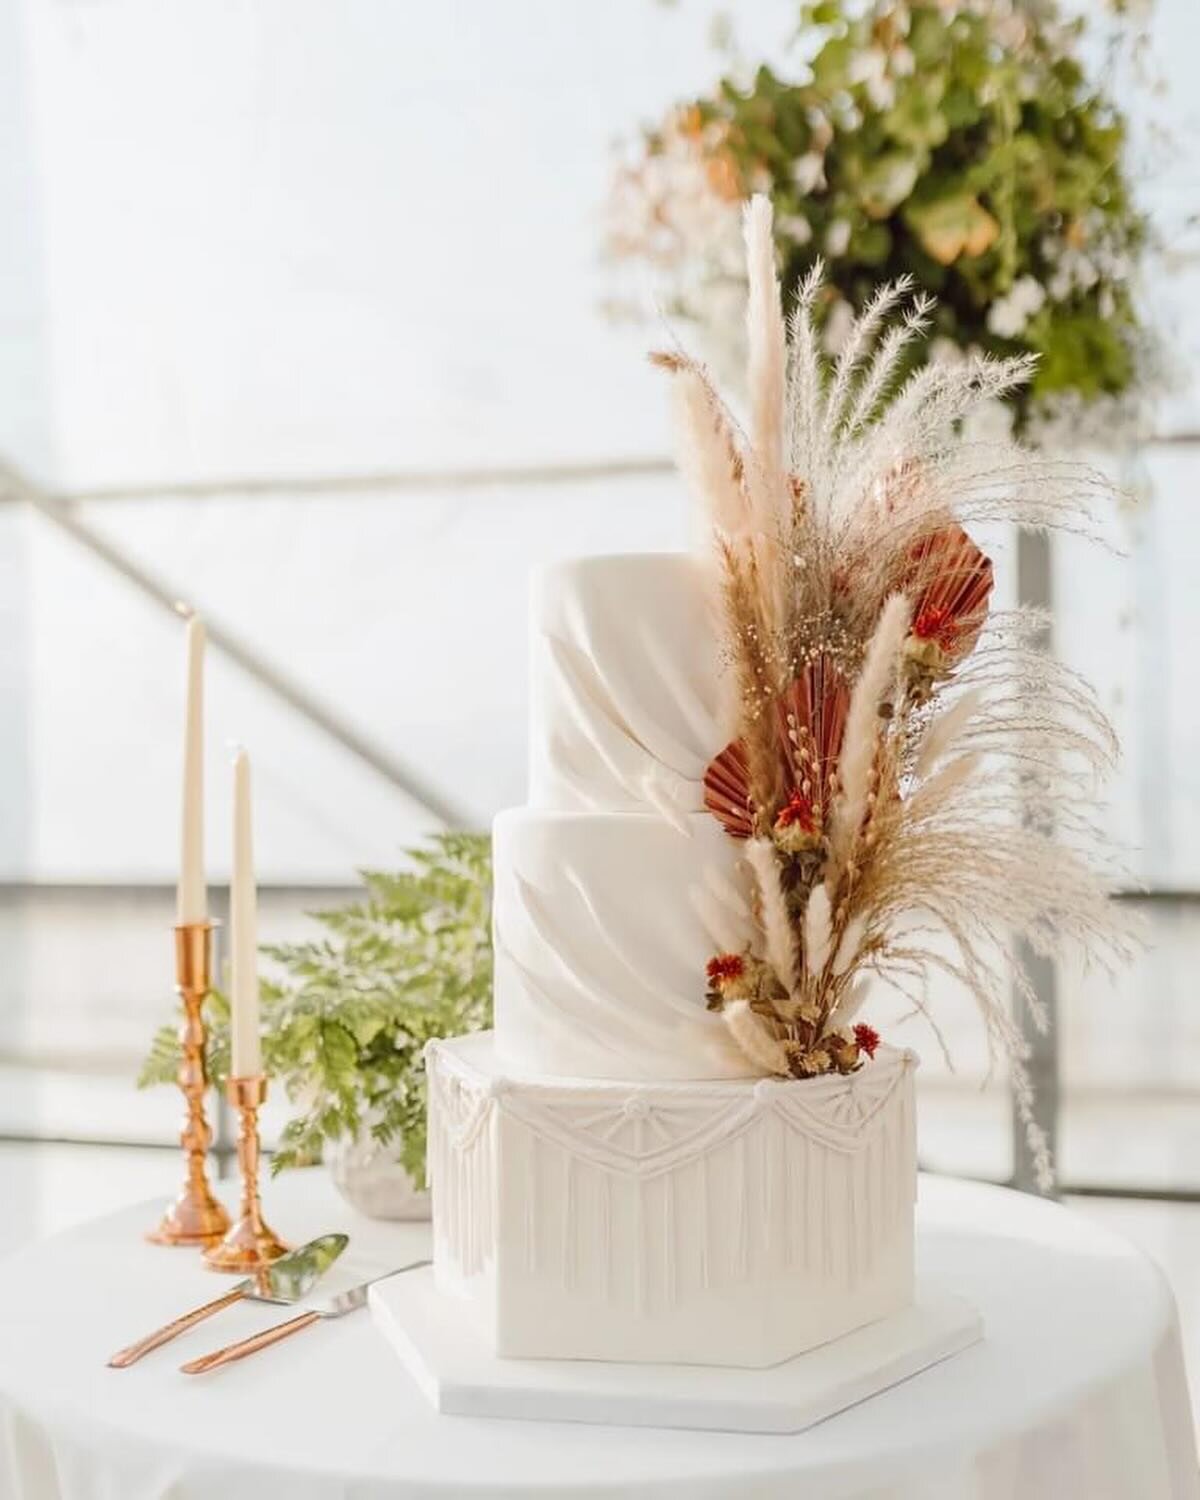 Get ready to satisfy your sweet tooth and indulge in delectable cakes from @lydiascakesconfections at Novelty Hill/Janiuk Winery during the tour!

&ldquo;Allow me to be apart of your Big Day.  Let&rsquo;s sit down and design YOUR dream wedding cake a